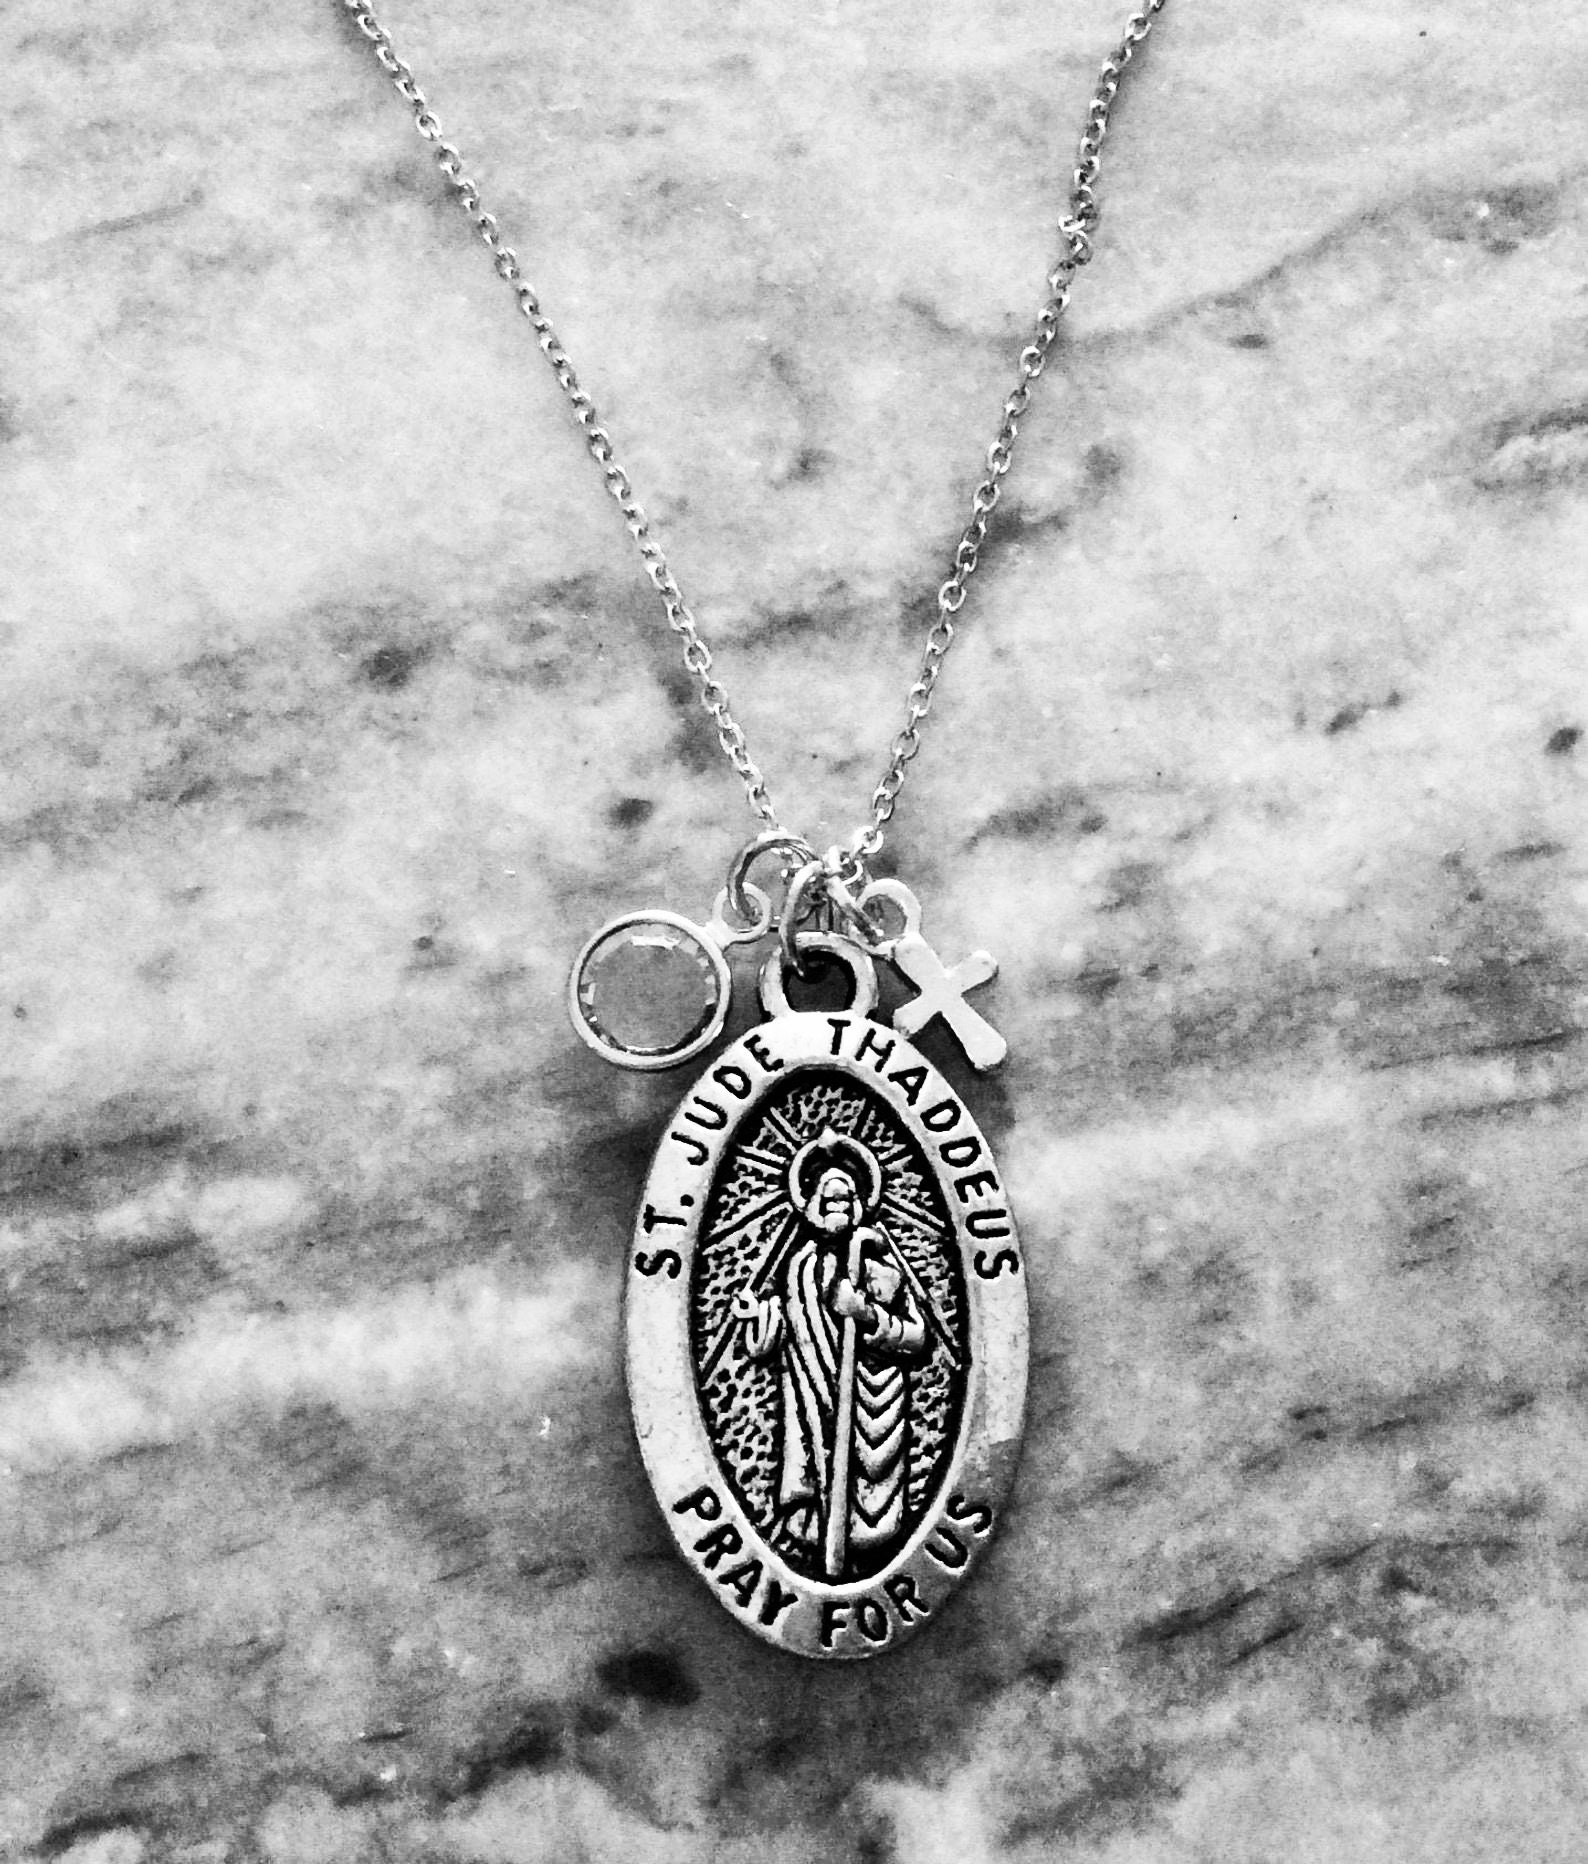 Oval 'St Jude Pray For Us' Pendant Medal Necklace on a Silver Plated Chain  Christian Patron Saint of Lost Causes Hope St Jude Thaddeus Gift :  Amazon.co.uk: Fashion